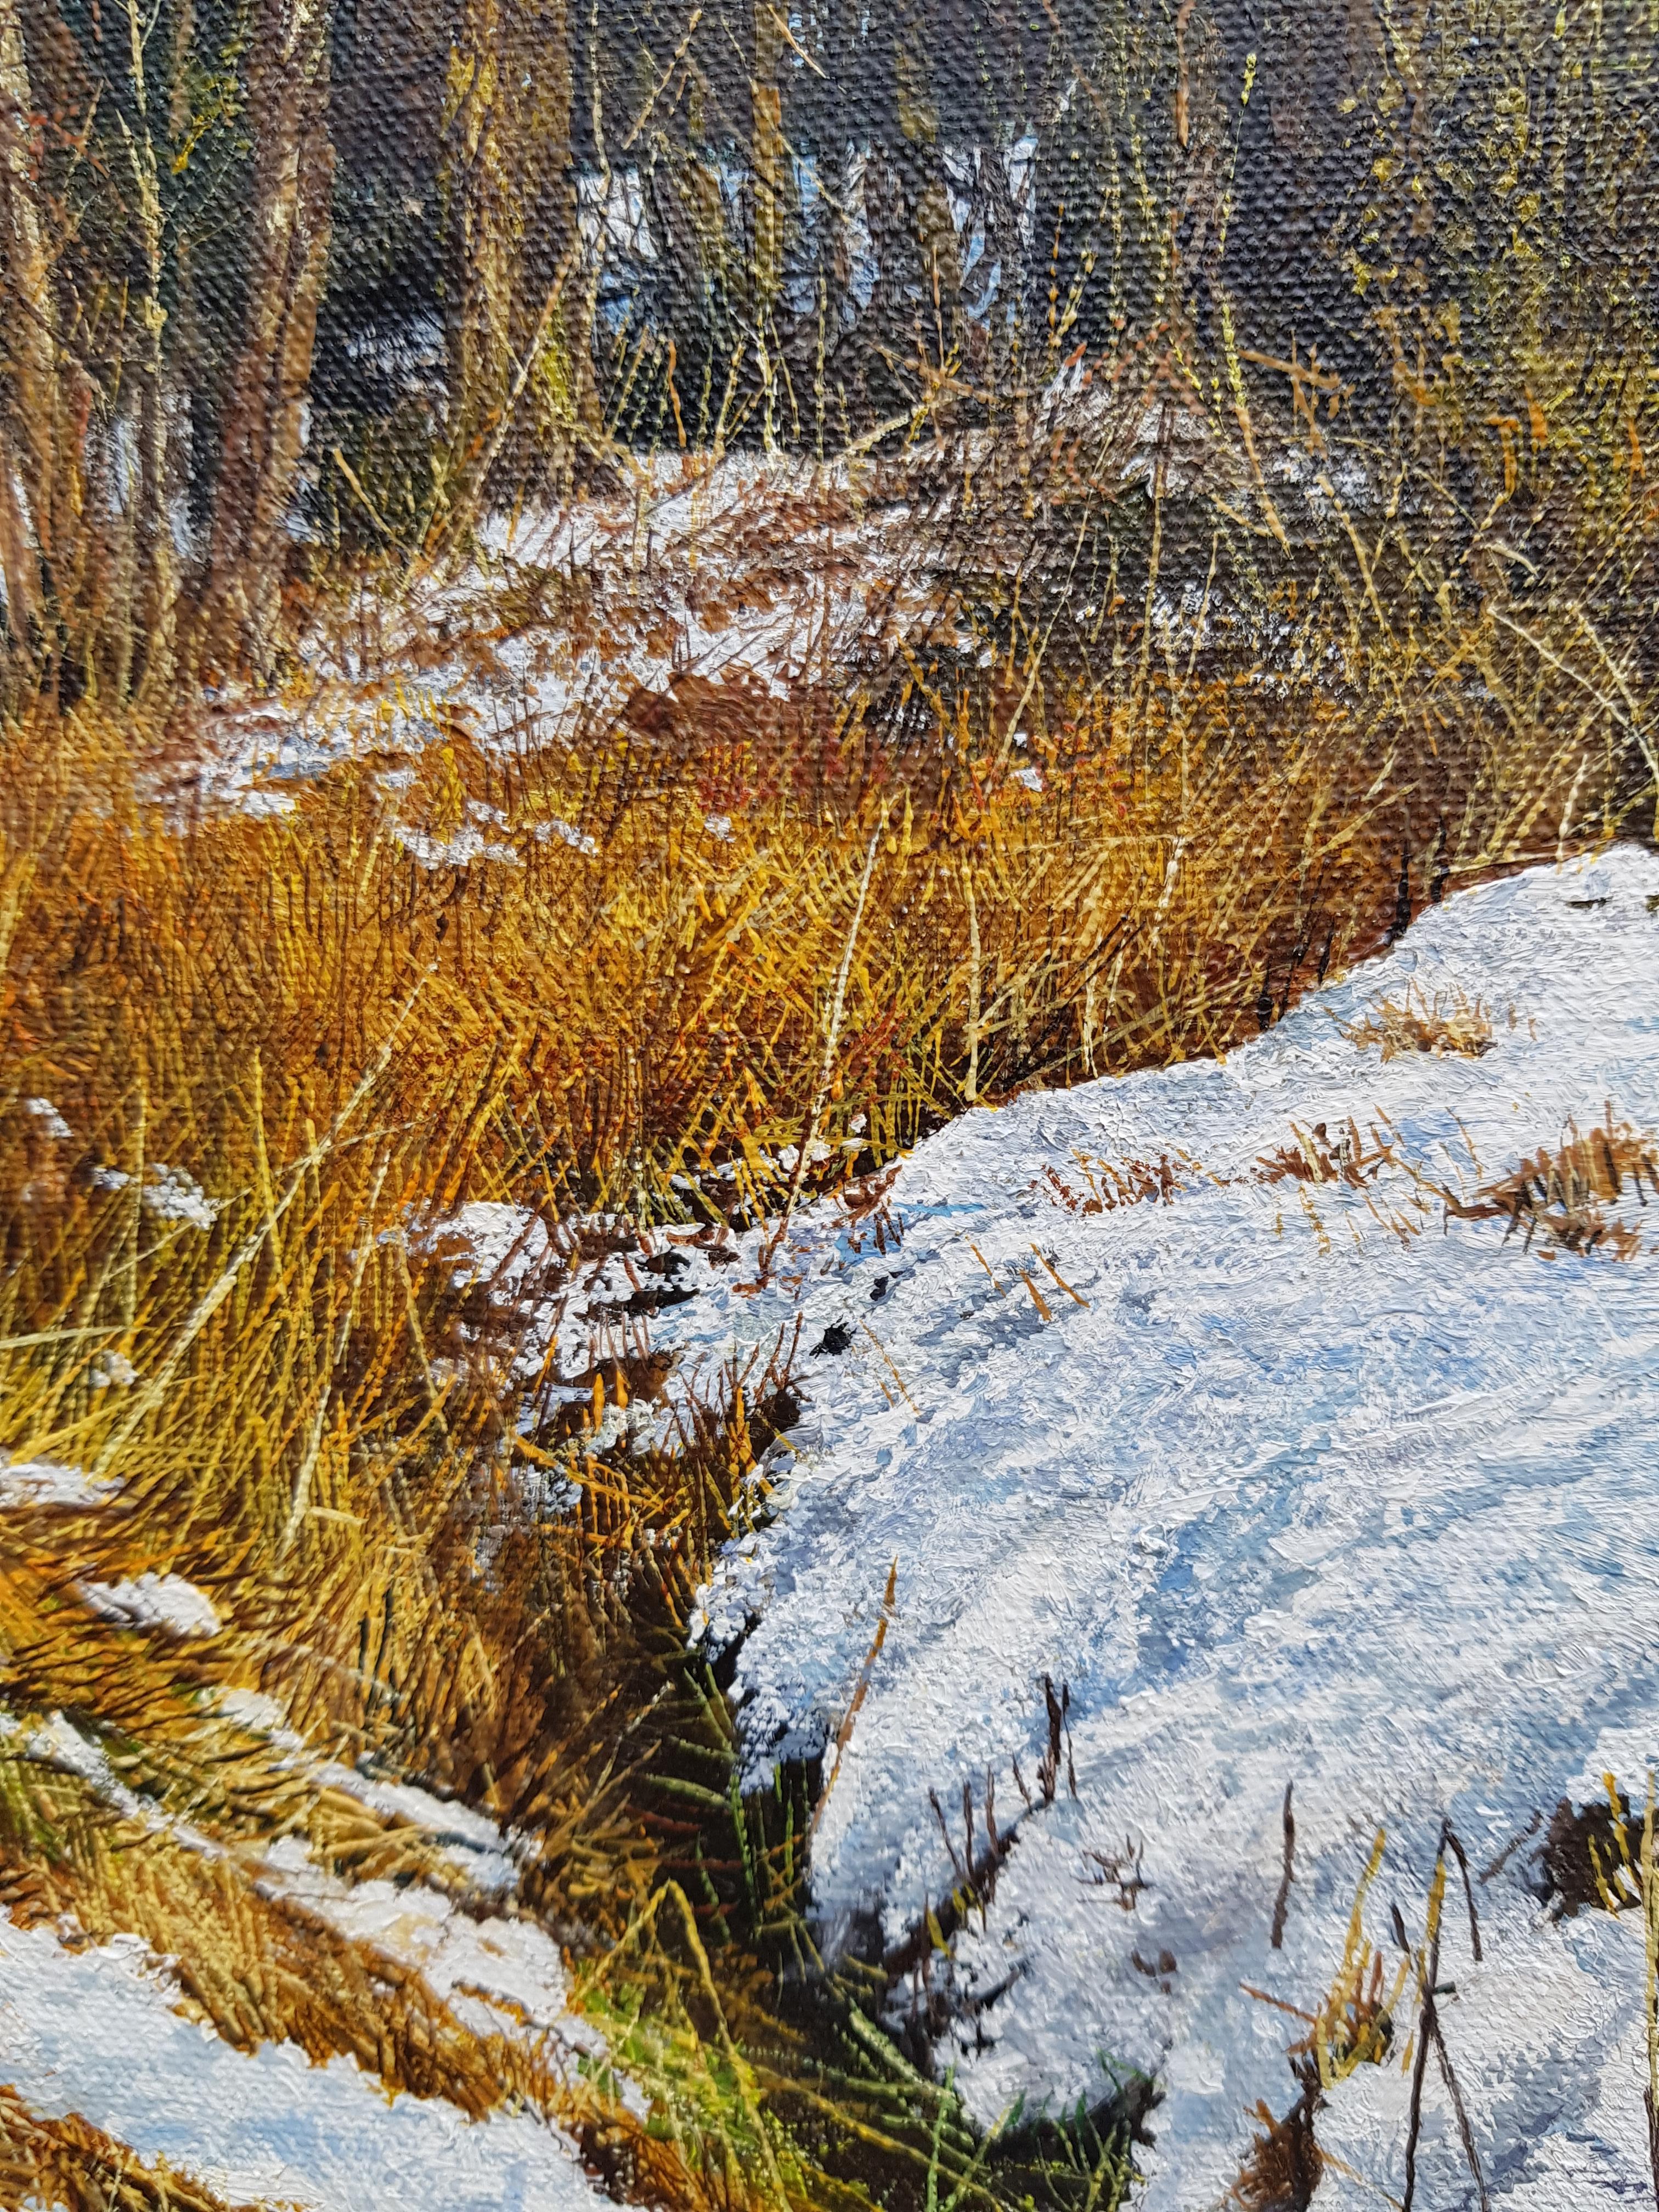 'The Lost Wood' A Realist Snowy Landscape by Contemporary artist Martin Taylor 2